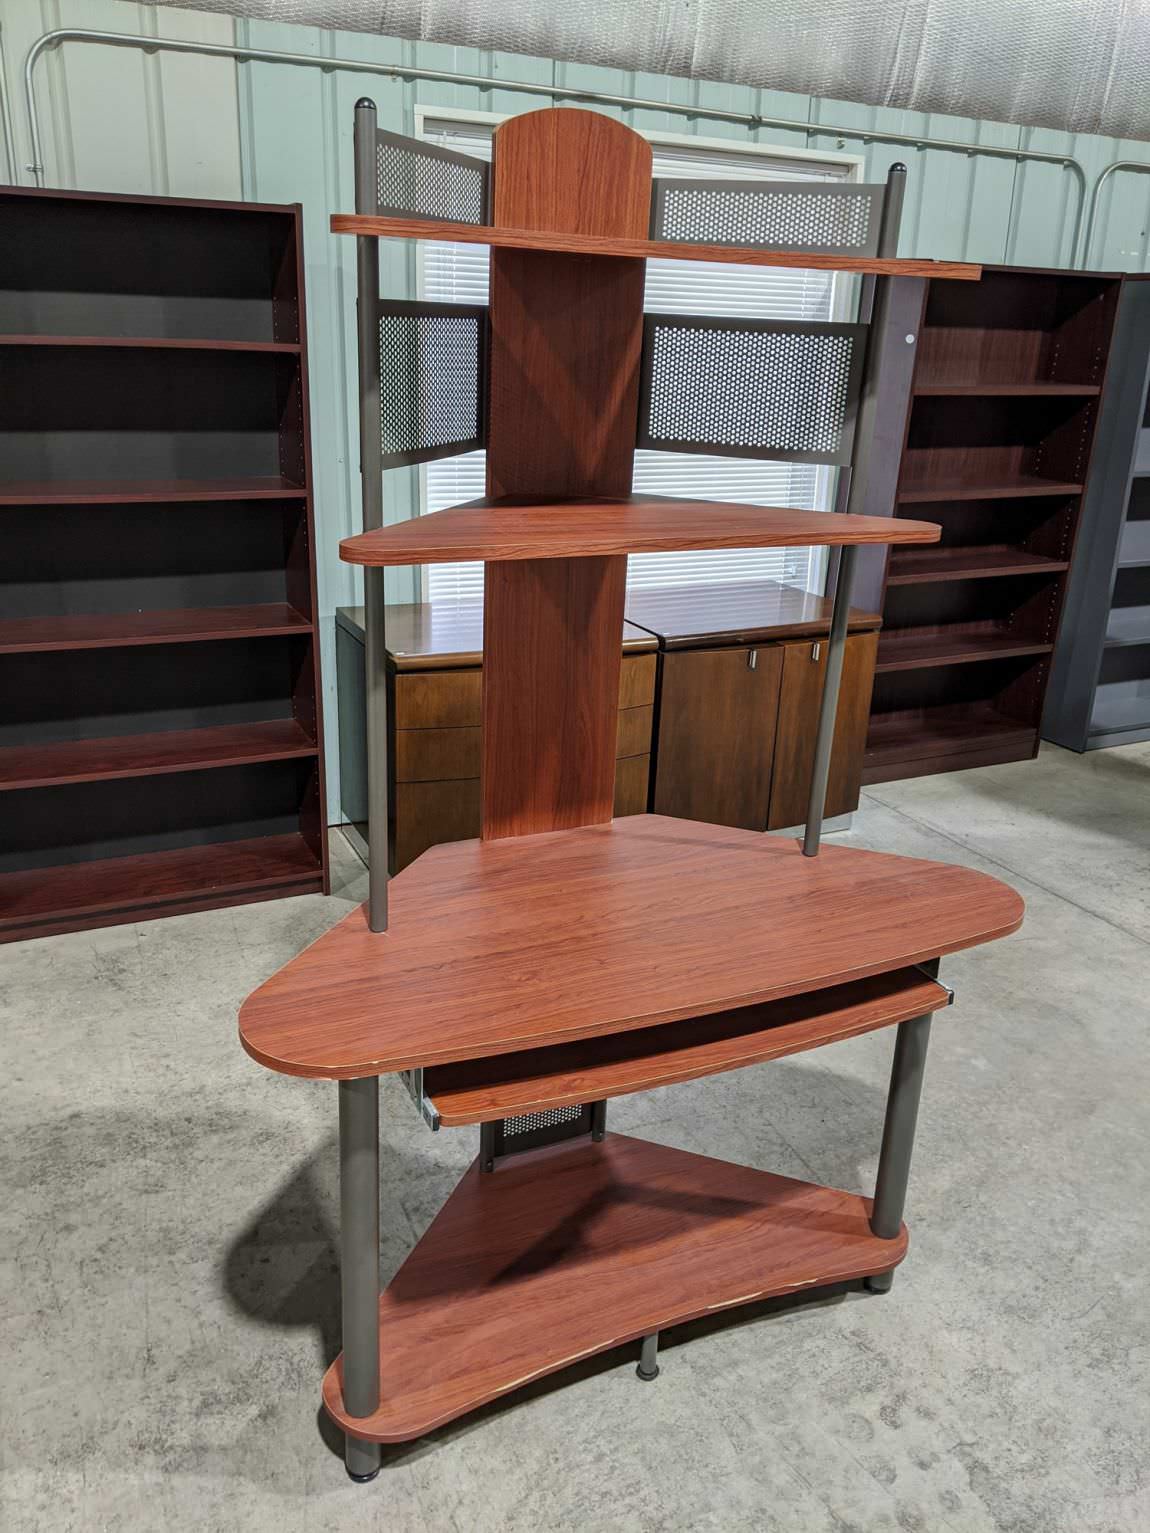 Cherry Laminate Corner Desk with Keyboard Tray and Shelves